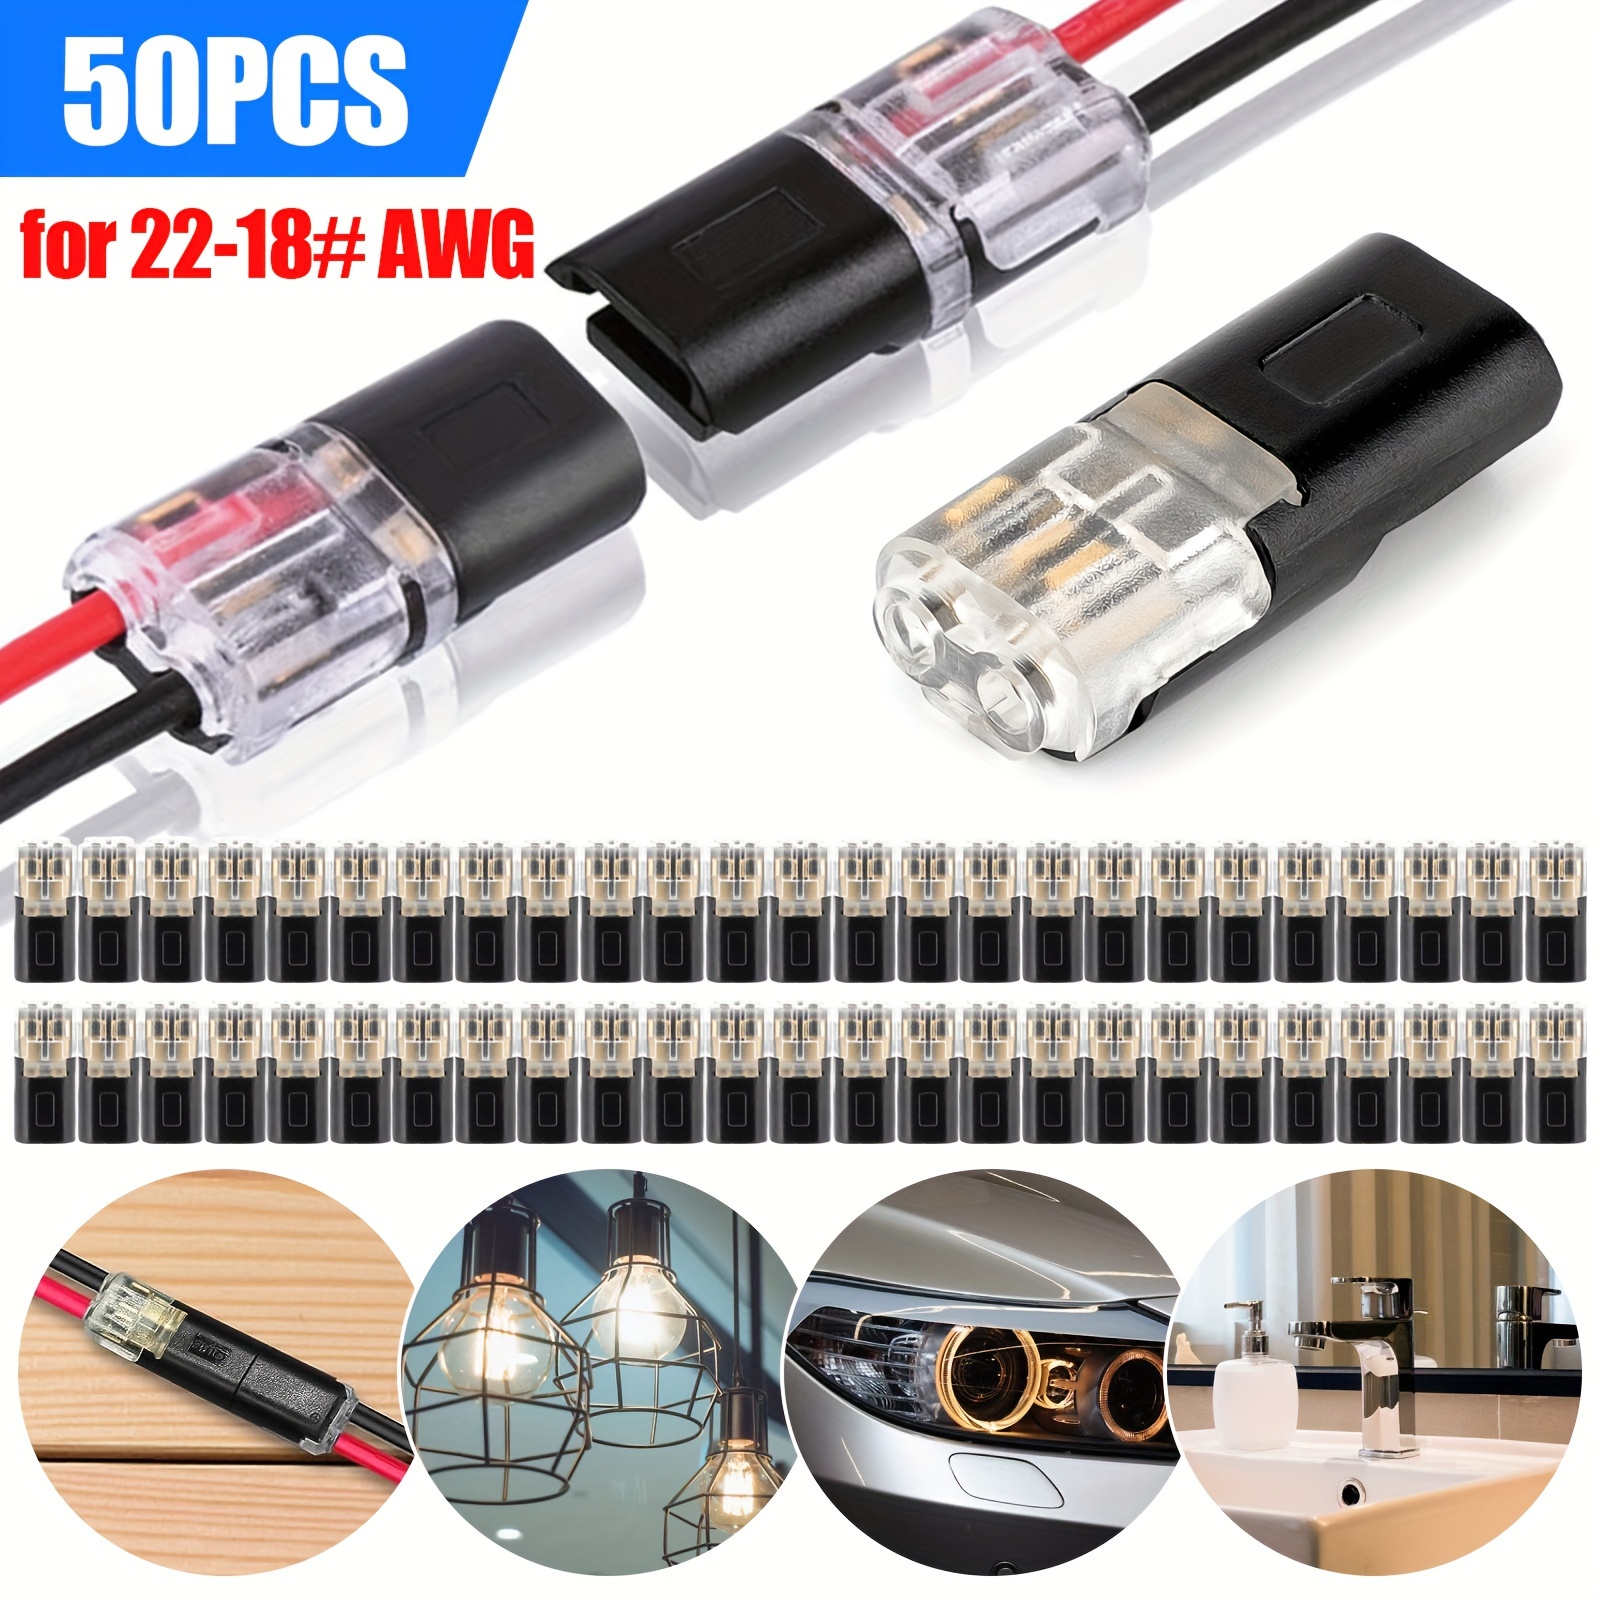 

50pcs Double-wire Cable Plug-in Snap Connector Connections Clamp With Locking Buckle Fast Connect Low Voltage Wire Connectors